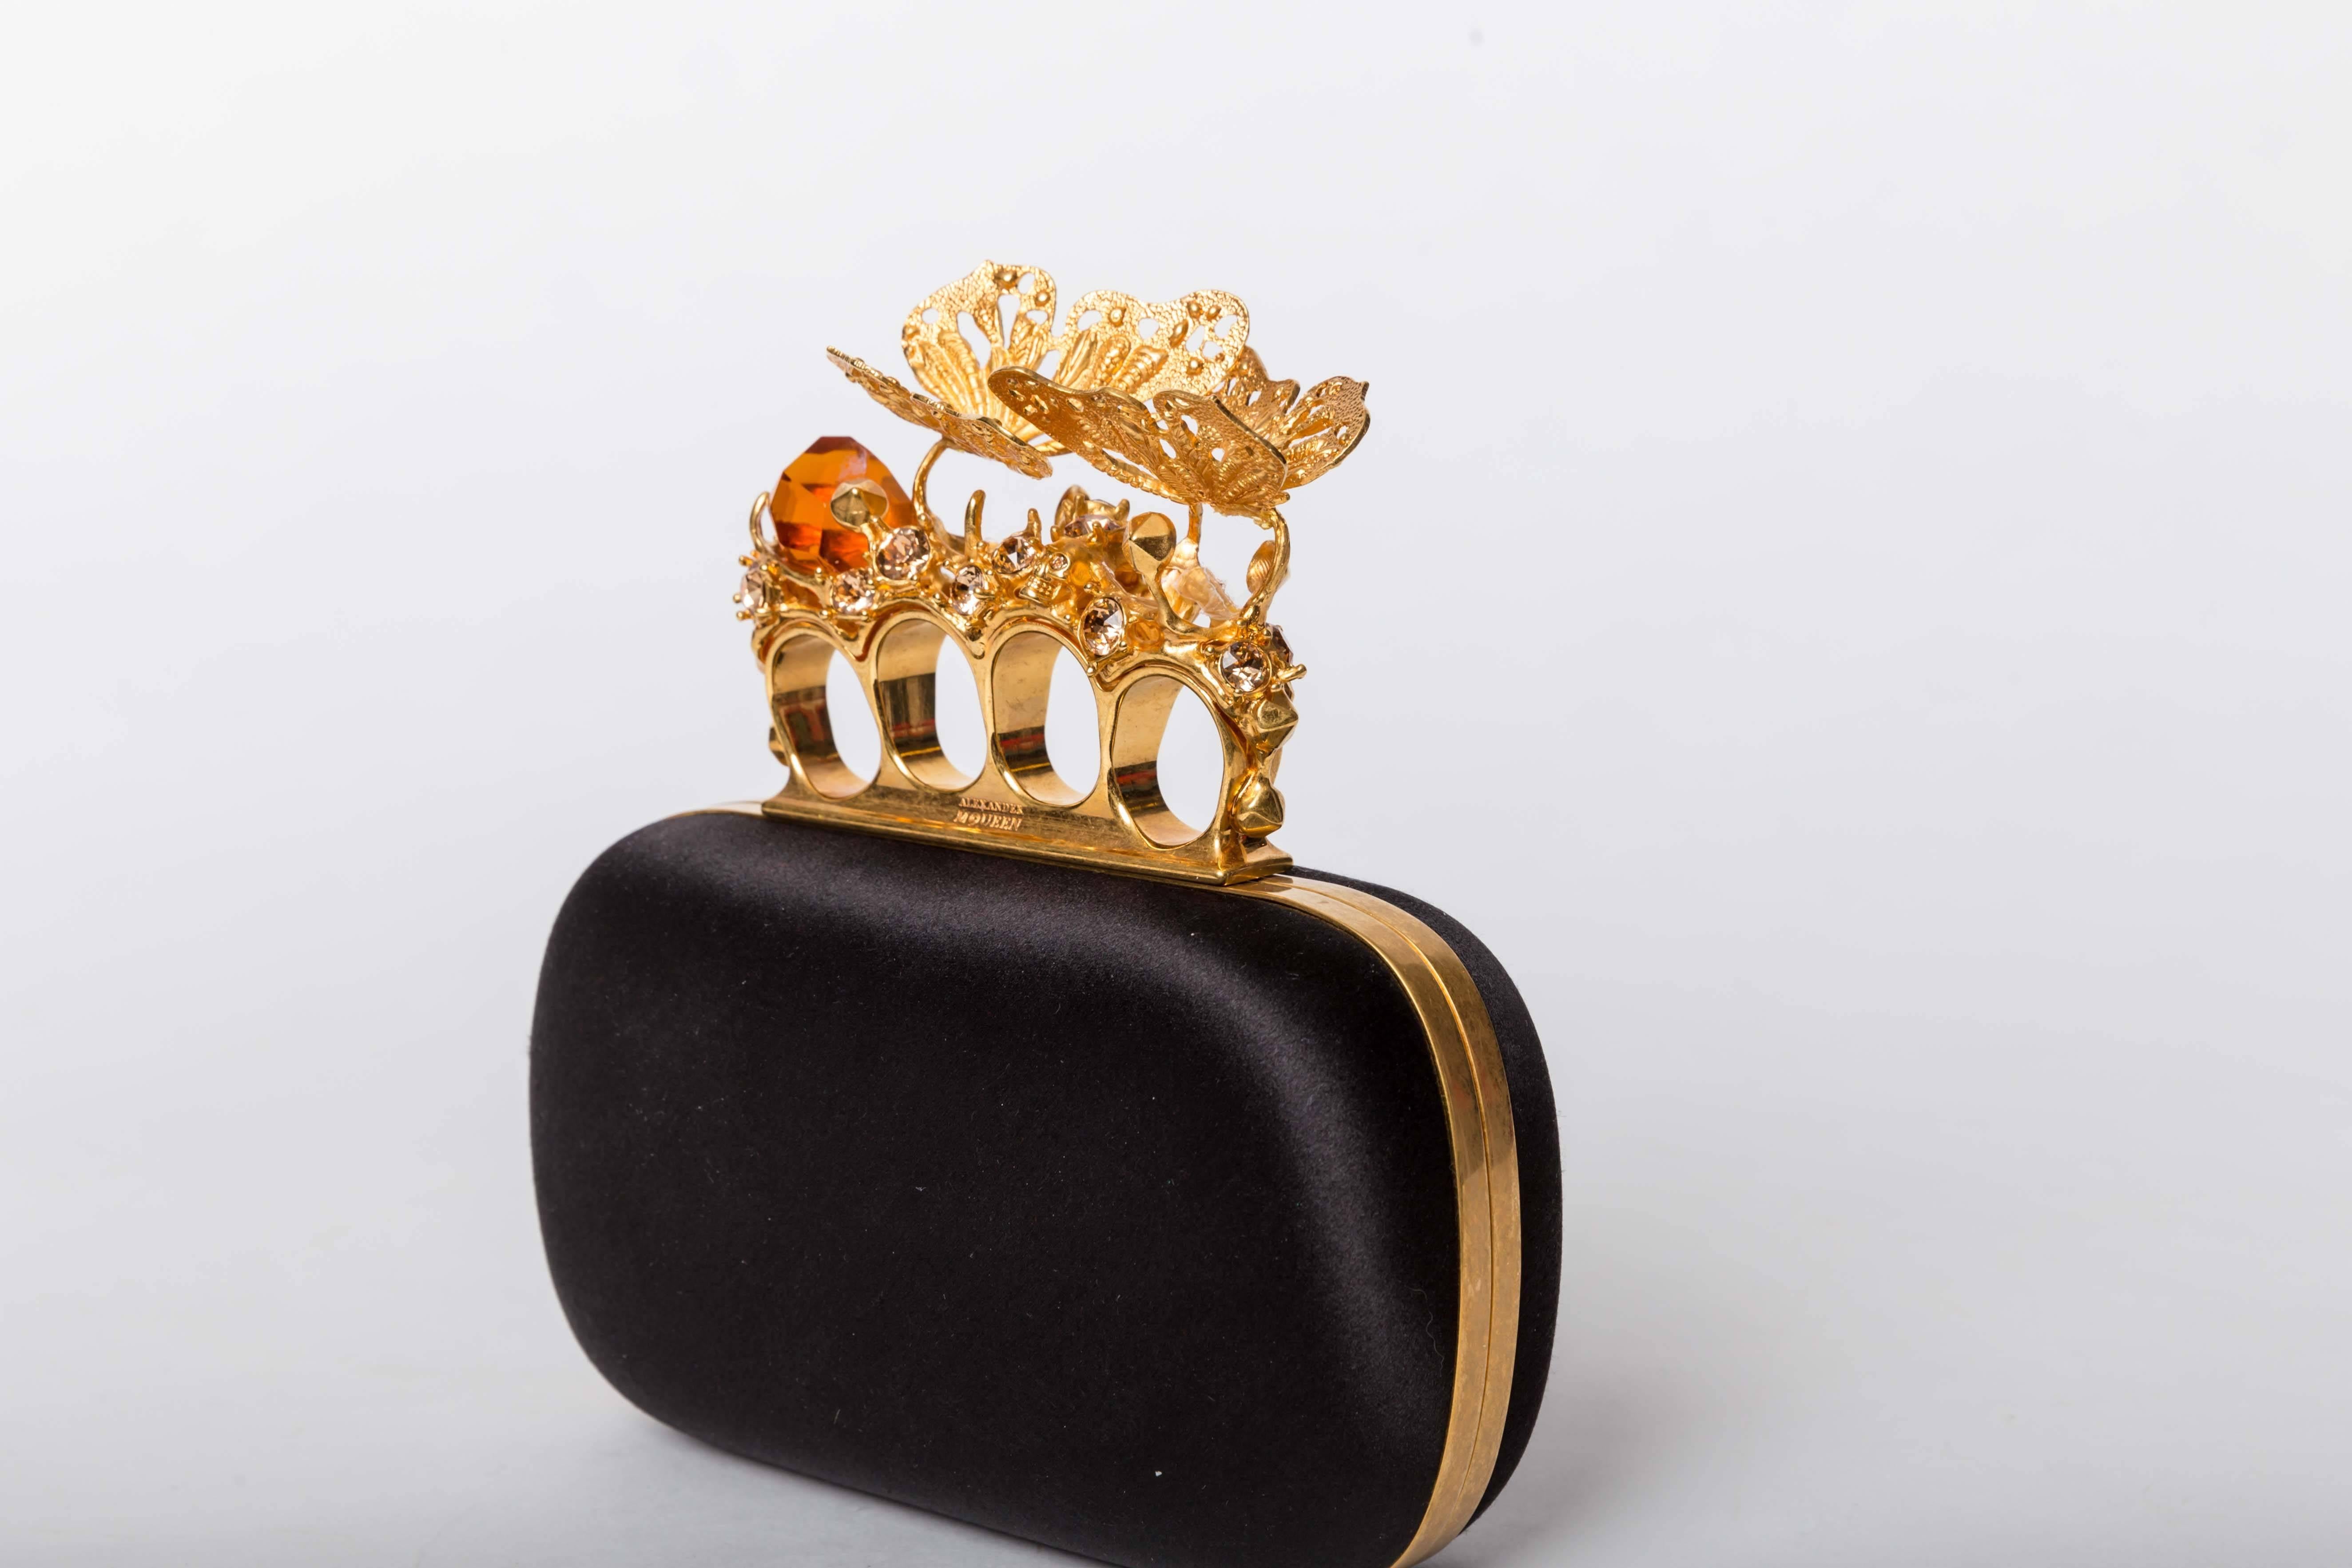 Alexander McQueen Butterfly Knuckle-Duster Box Clutch Bag features golden butterflies perched on large amber colored crystal stones. Trimmed with gilded brass hardware and fitted with iconic Swarovski-studded mini skulls, golden-framed, hard-shell